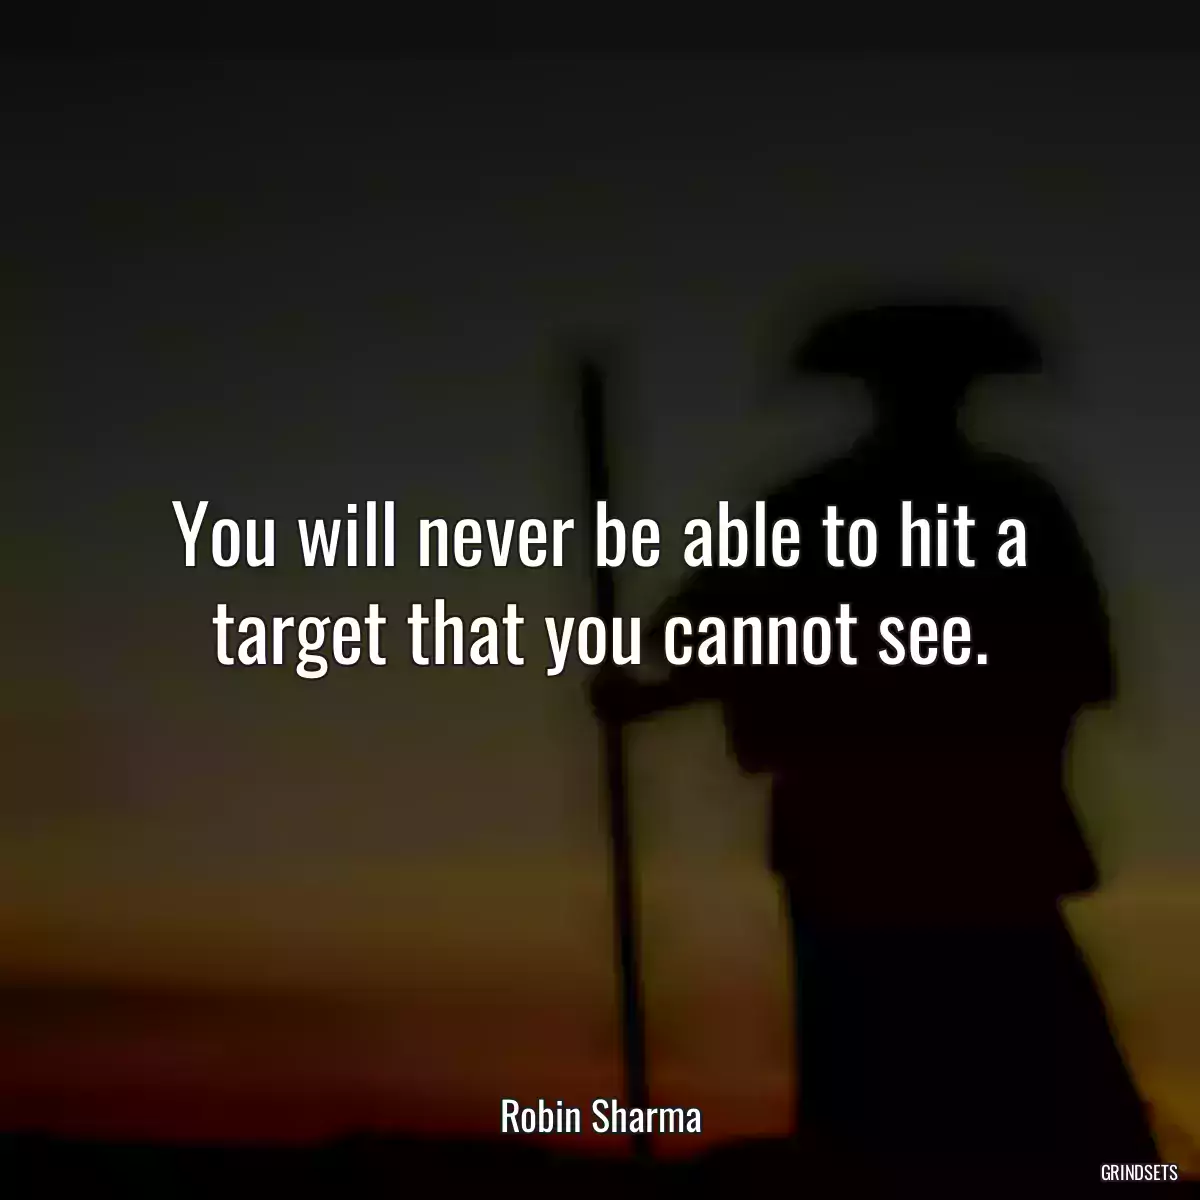 You will never be able to hit a target that you cannot see.